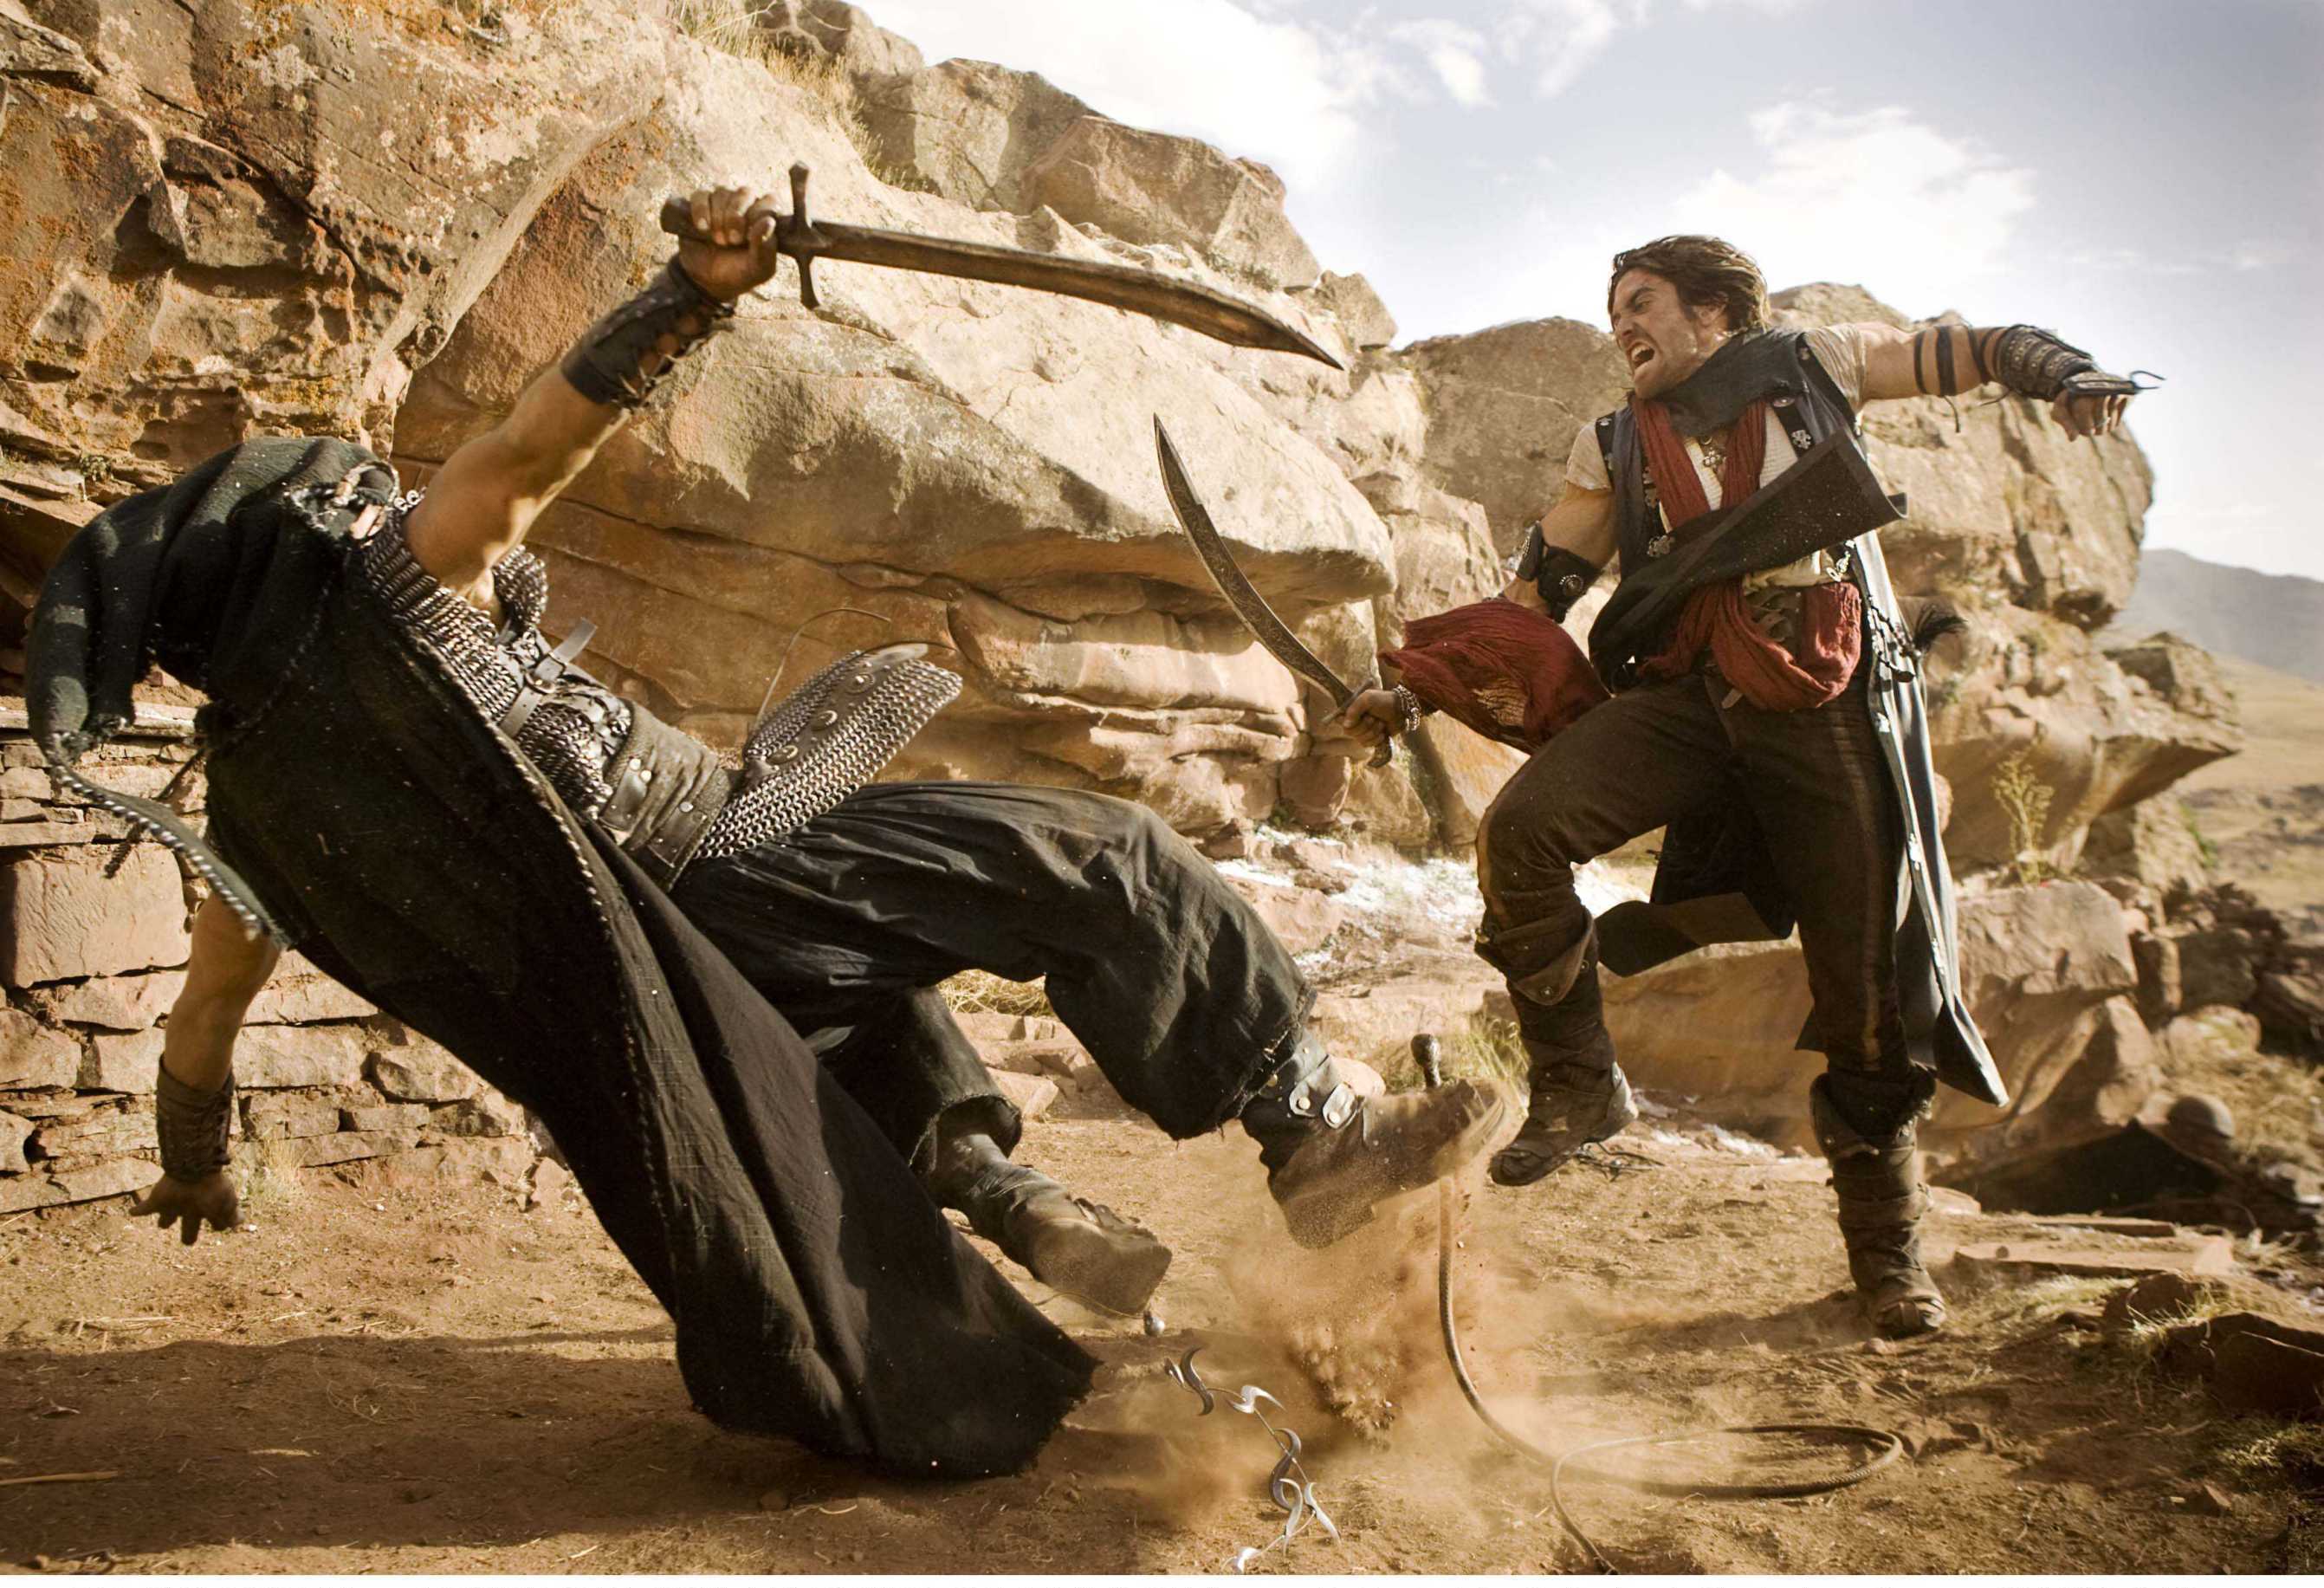 Movie review - 'Prince of Persia' puts great stars in repetitive story